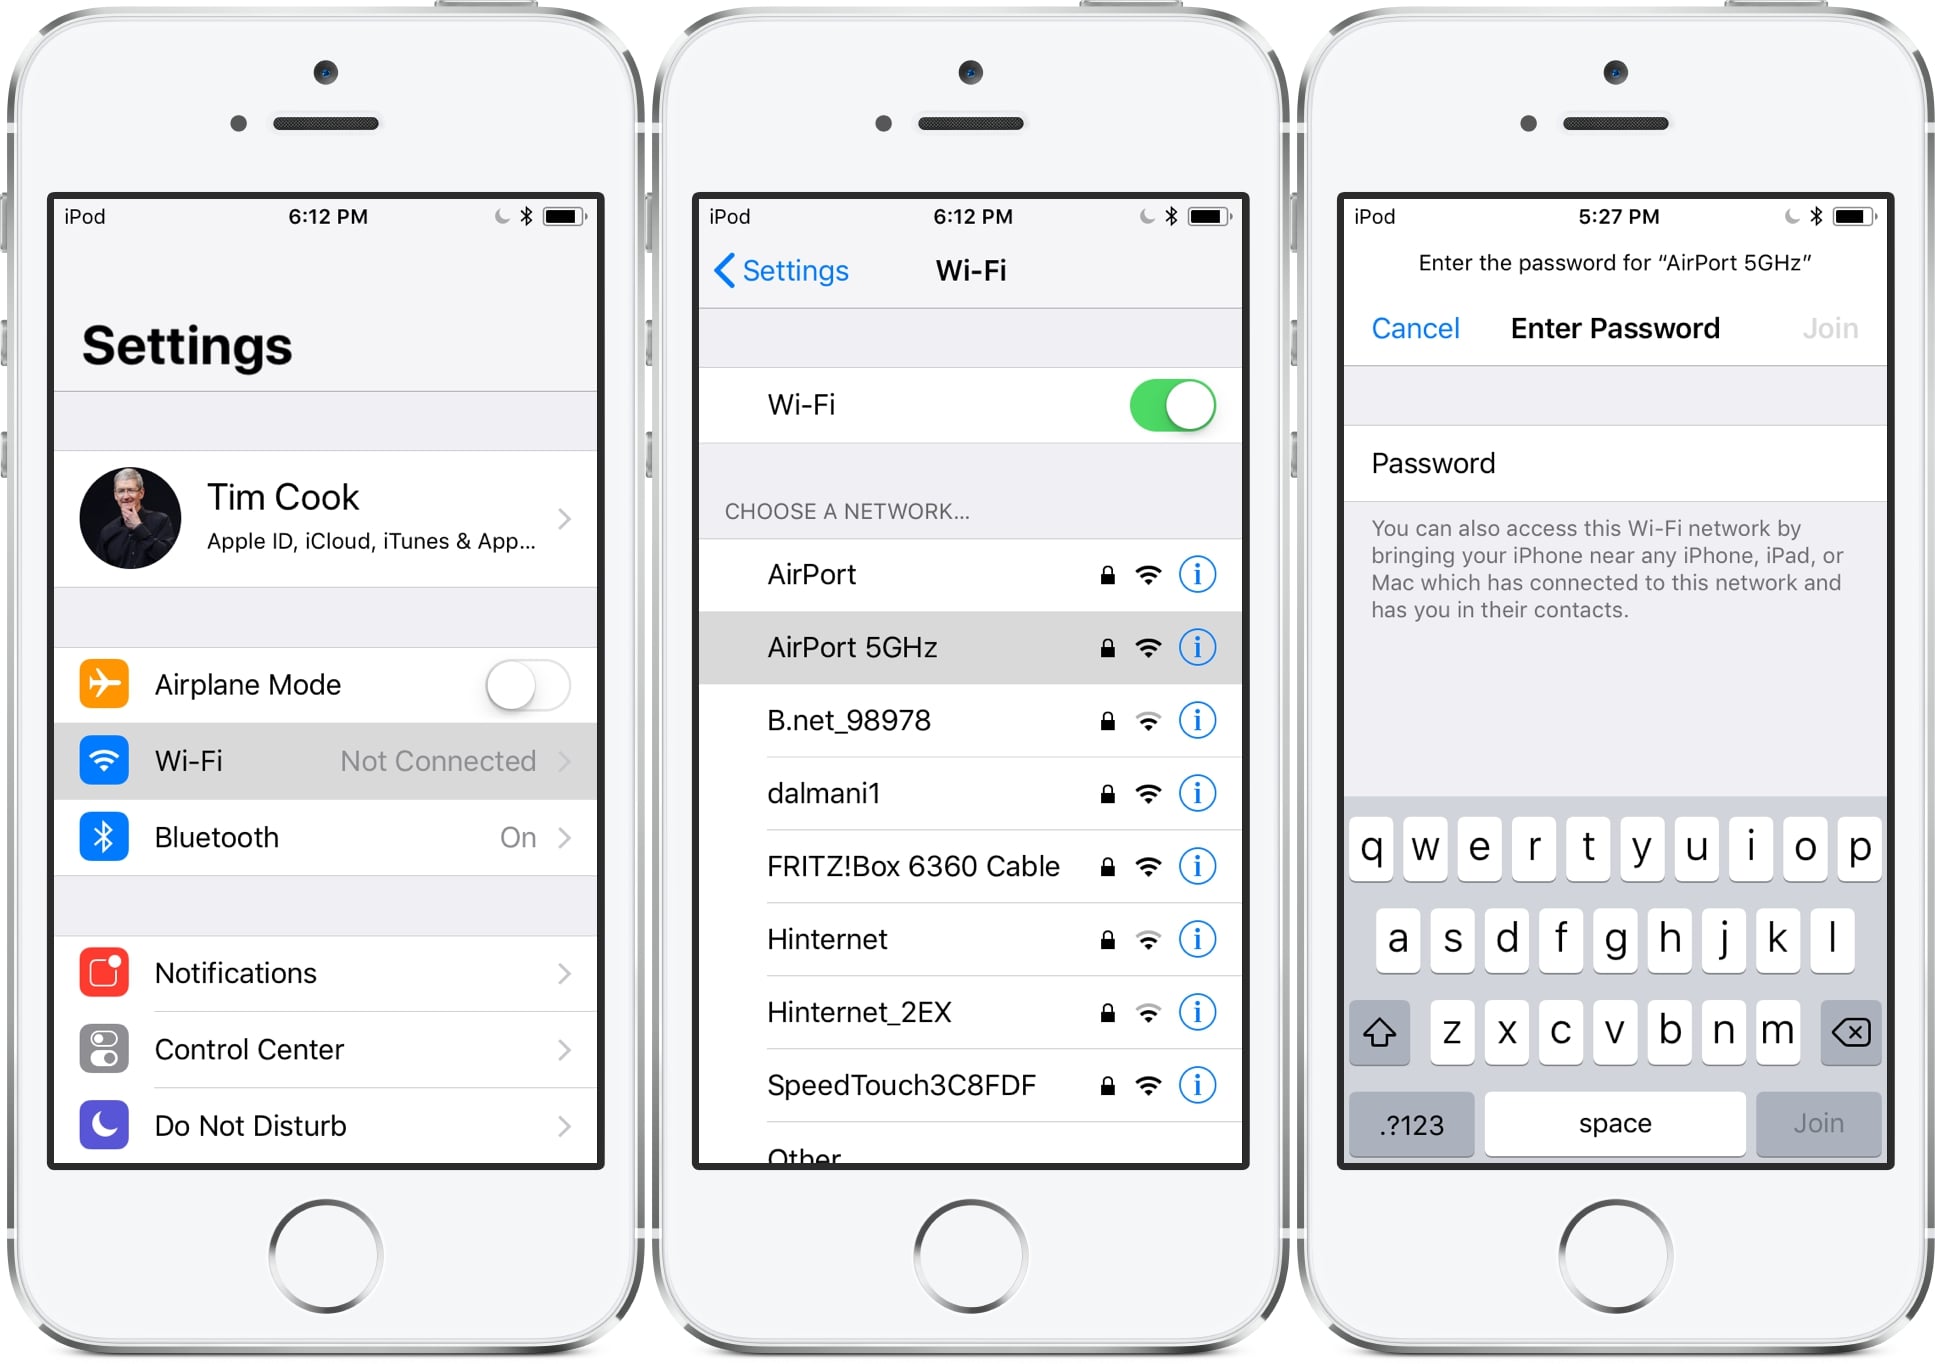 Check iPhone to start sharing Wi-Fi password